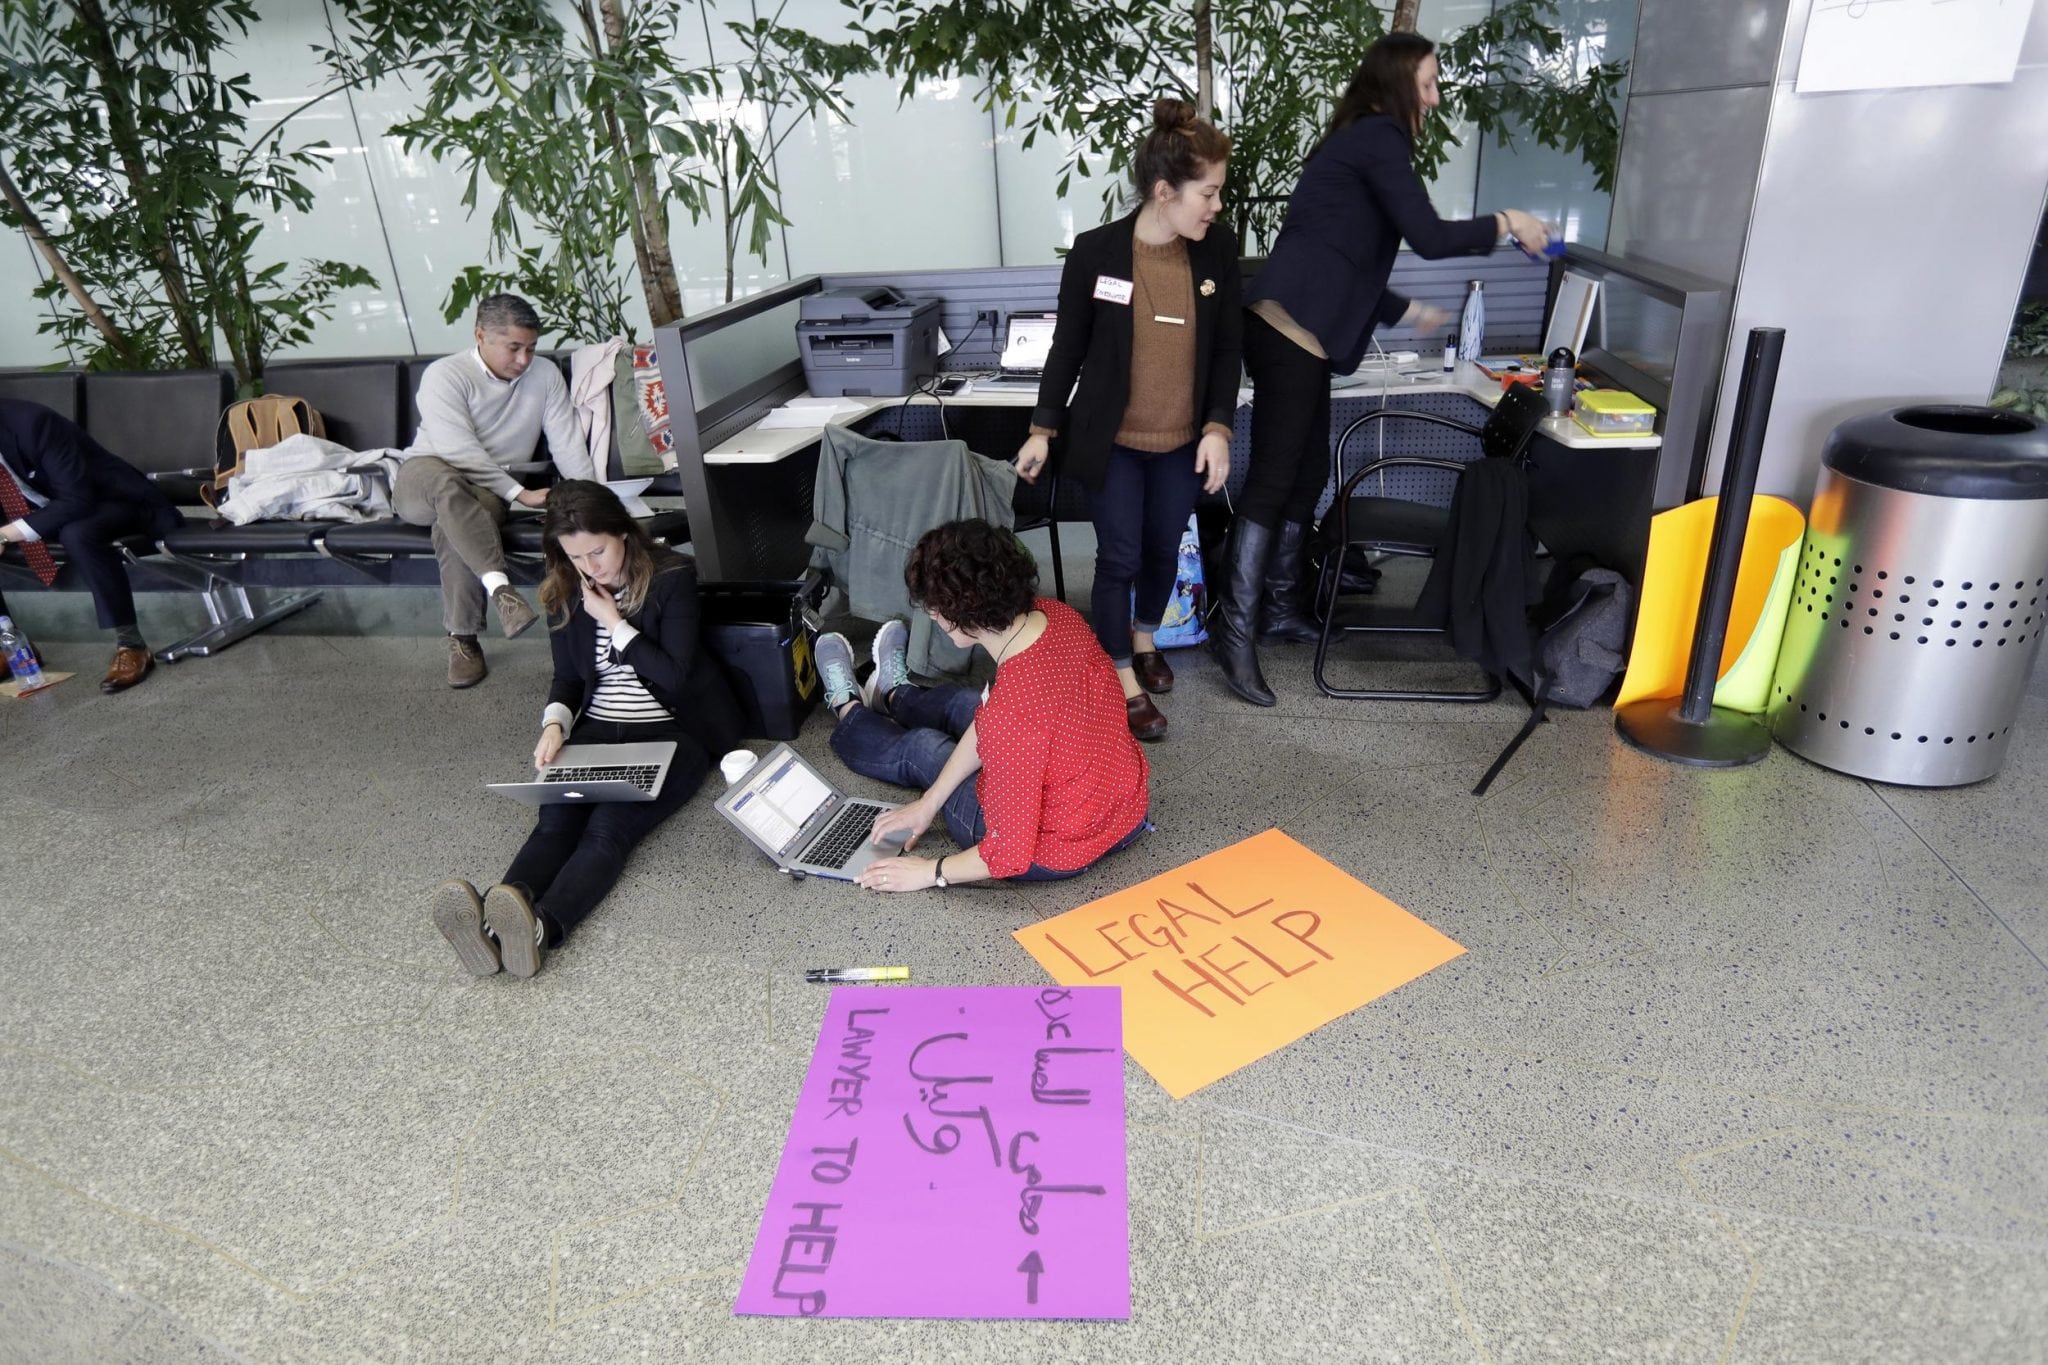 Attorneys offer legal help on Monday at San Francisco International Airport following President Donald Trump's travel ban. Nearly 40 percent of companies responding to a survey said they expect to reduce business travel as a result.